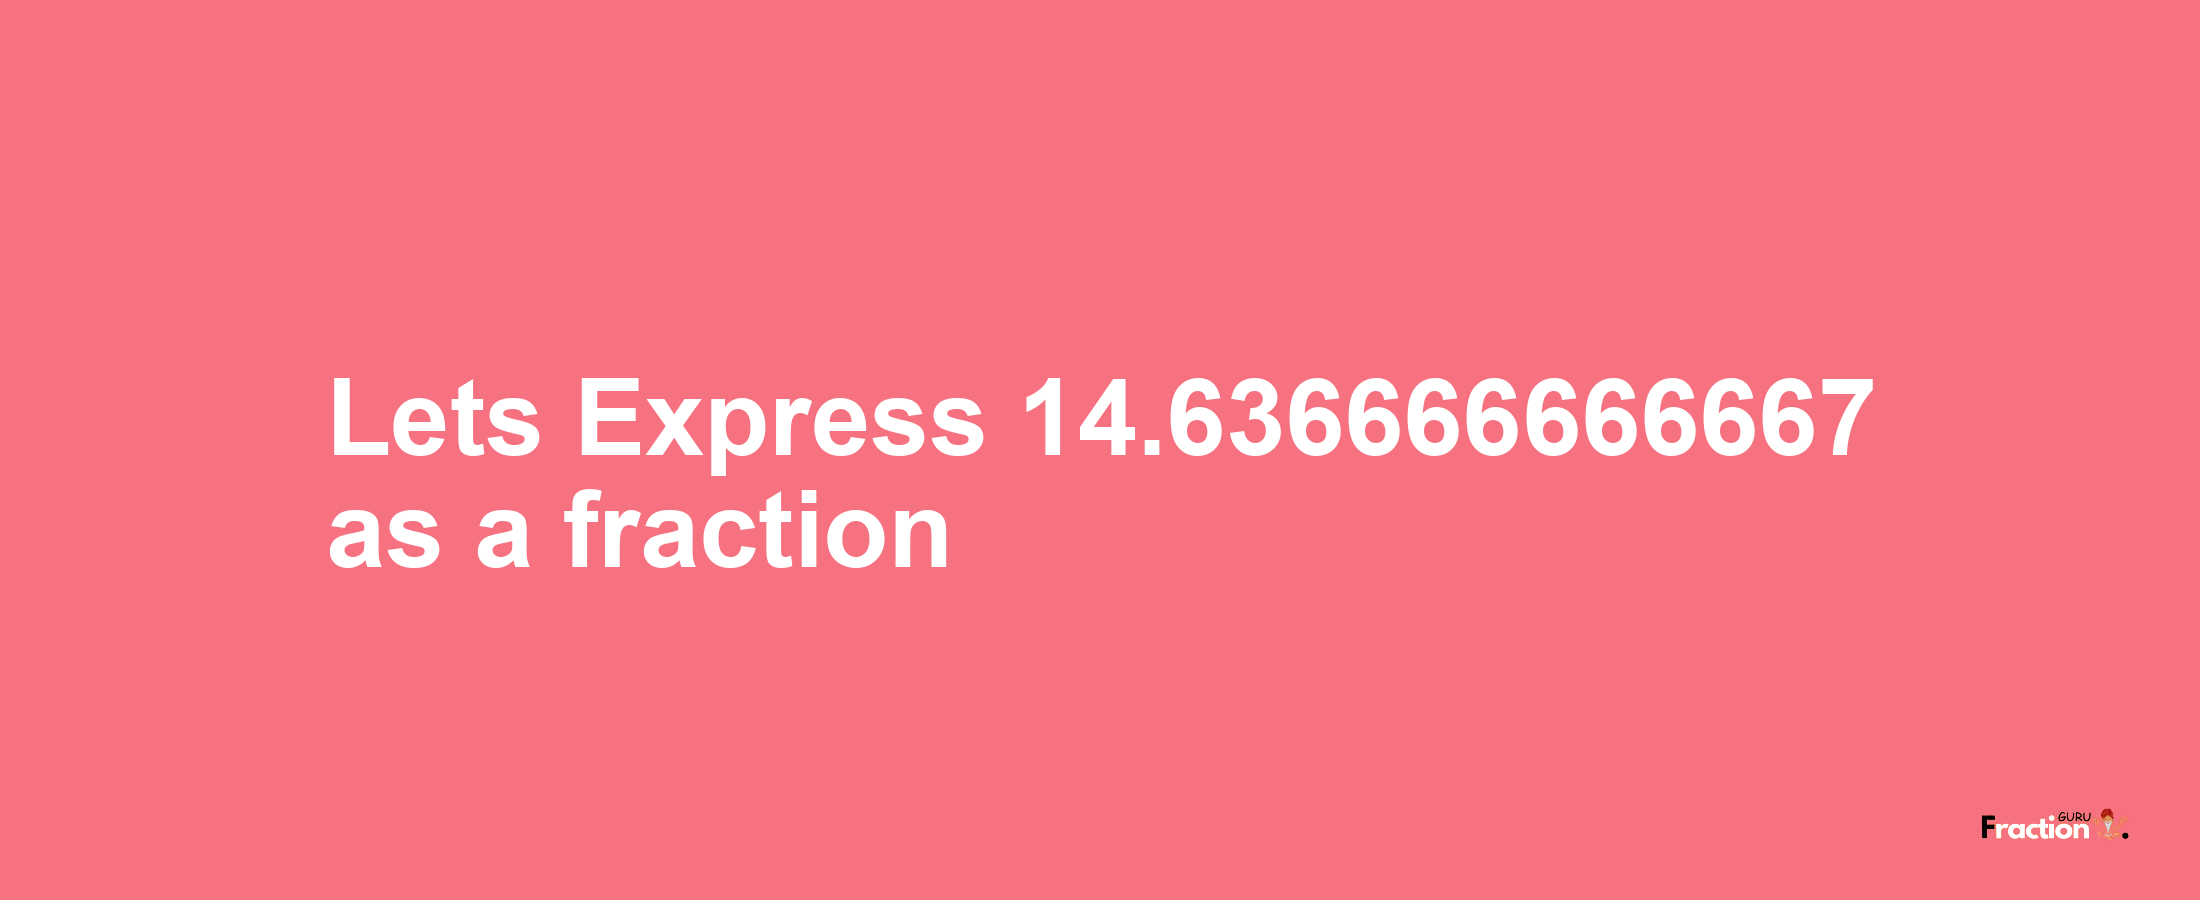 Lets Express 14.636666666667 as afraction